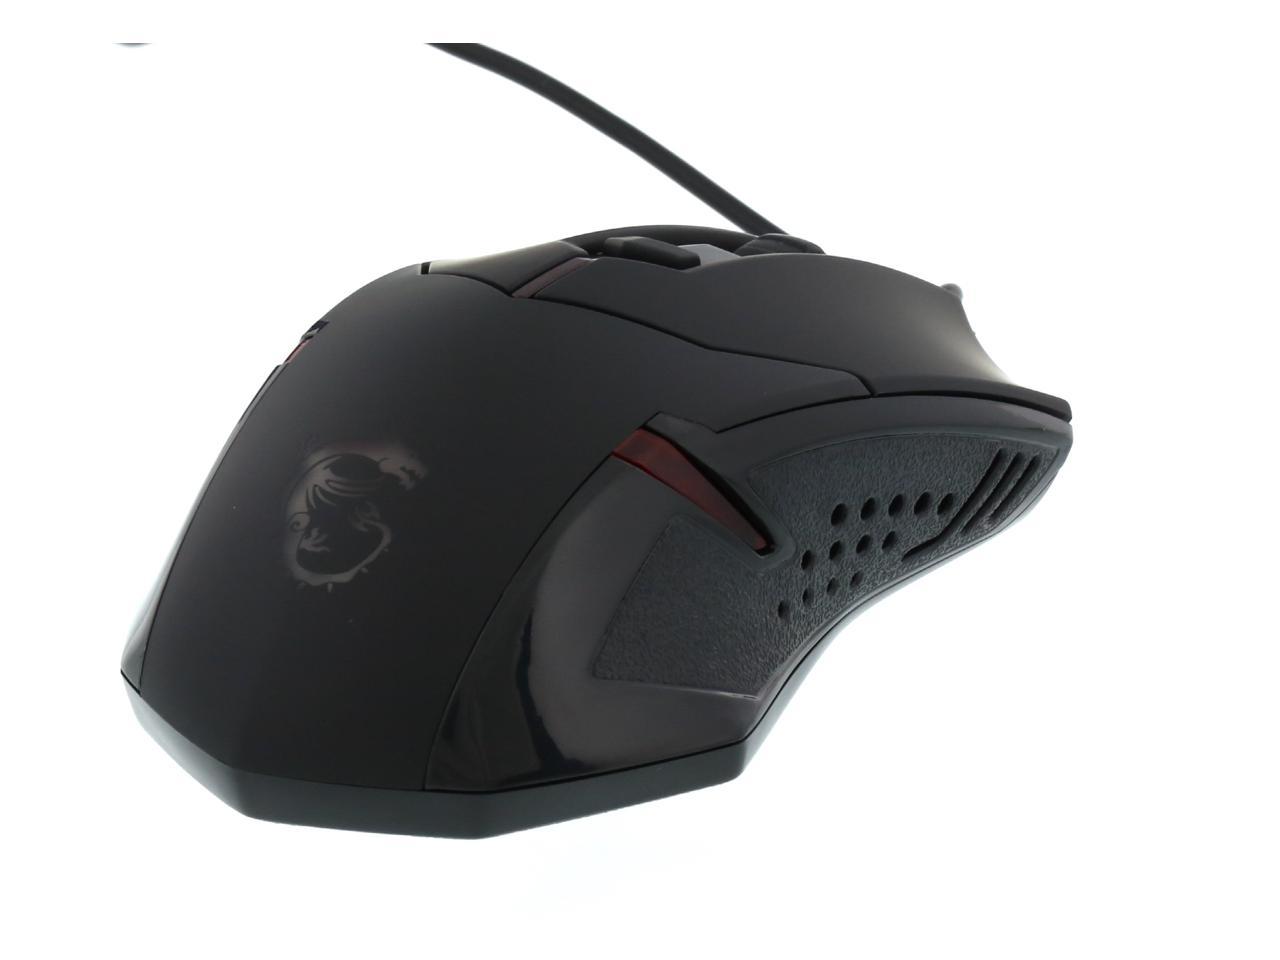 msi interceptor ds b1 h01-0001711 black 6 buttons 1 x wheel usb wired optical 1600 dpi gaming mouse